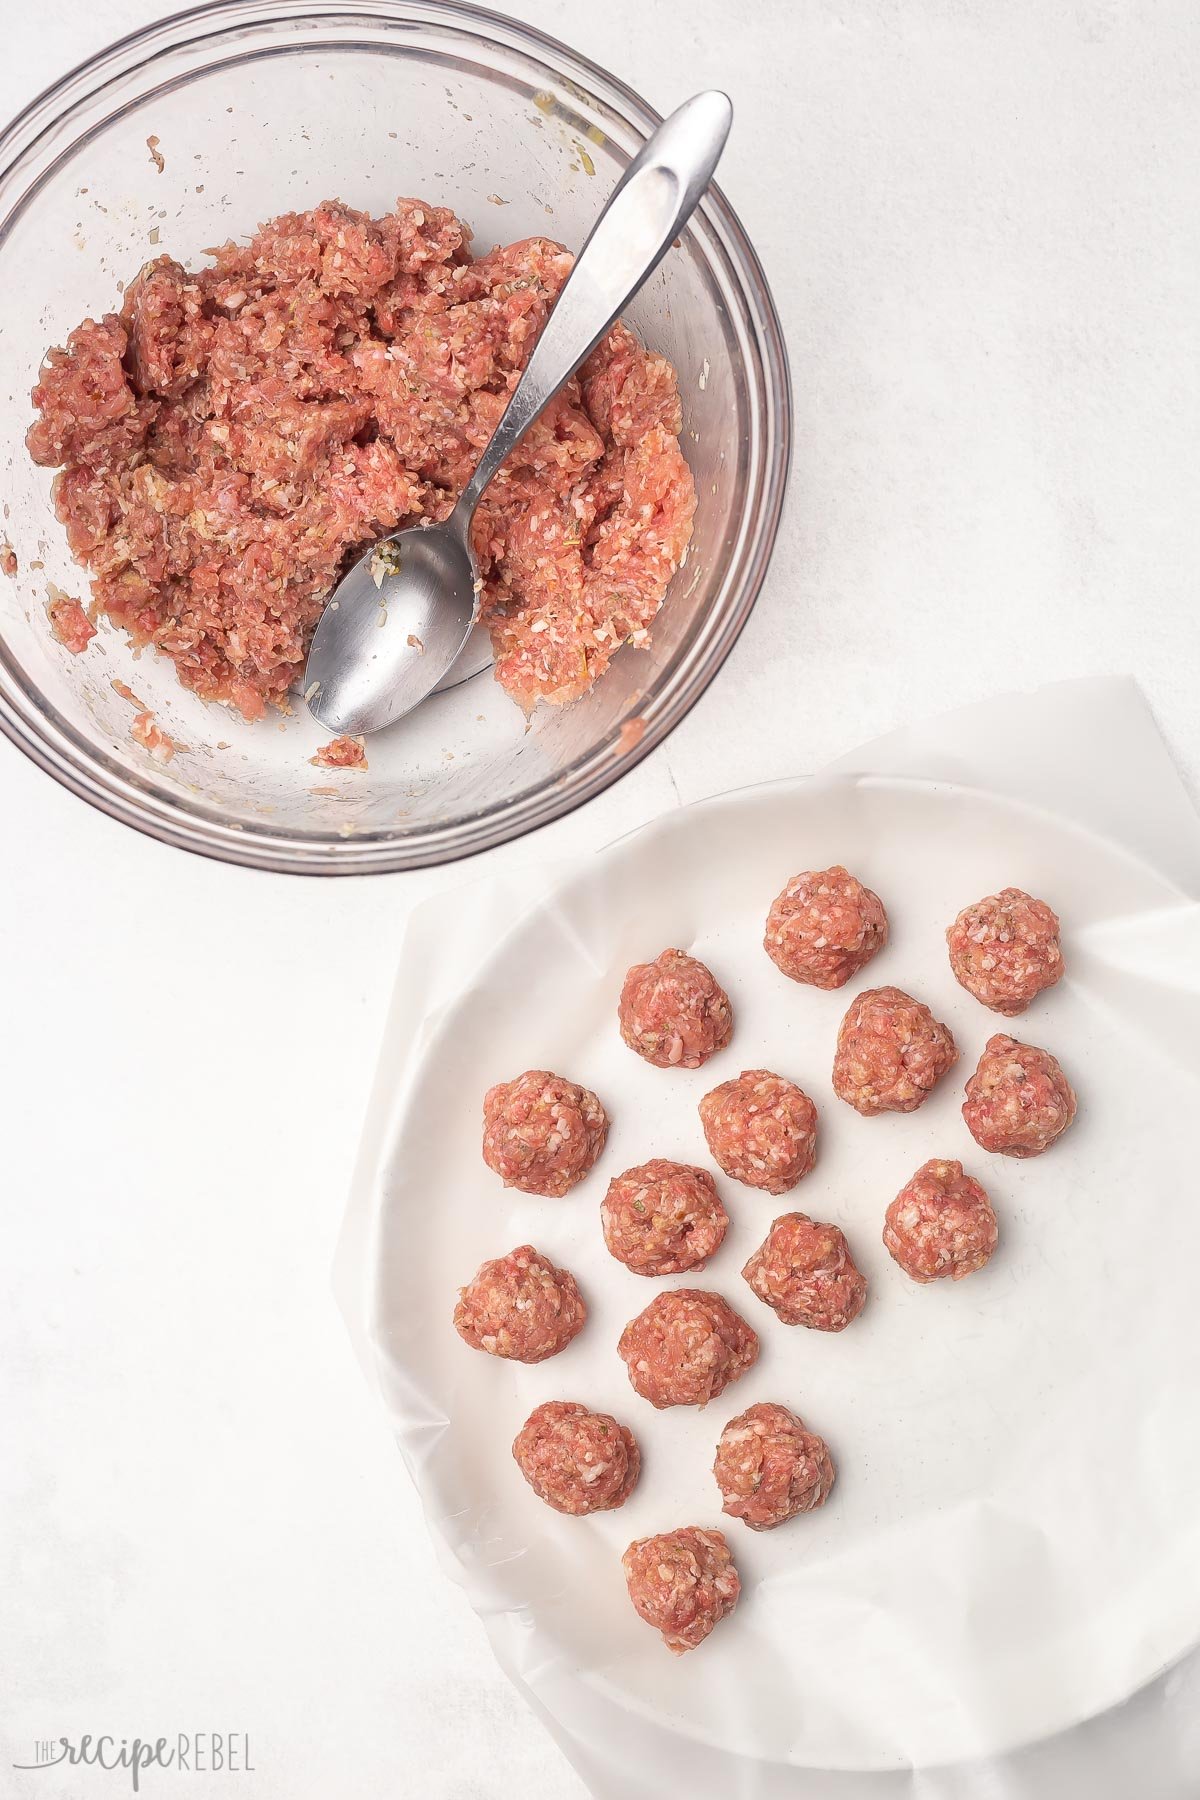 bowl of ground meat with formed meatballs on a plate.